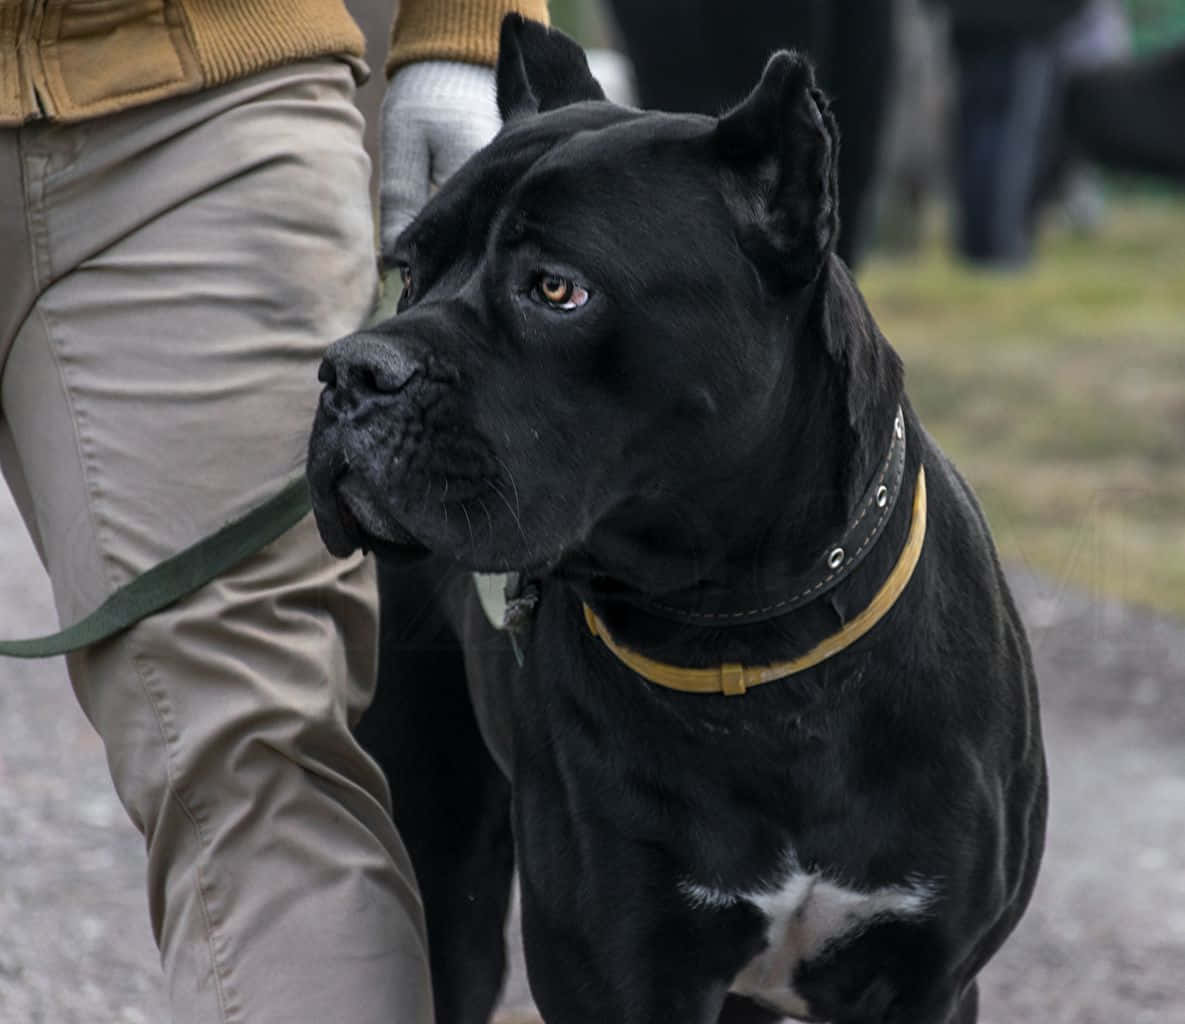 "Get to know the majestic and powerful Cane Corso dog breed"